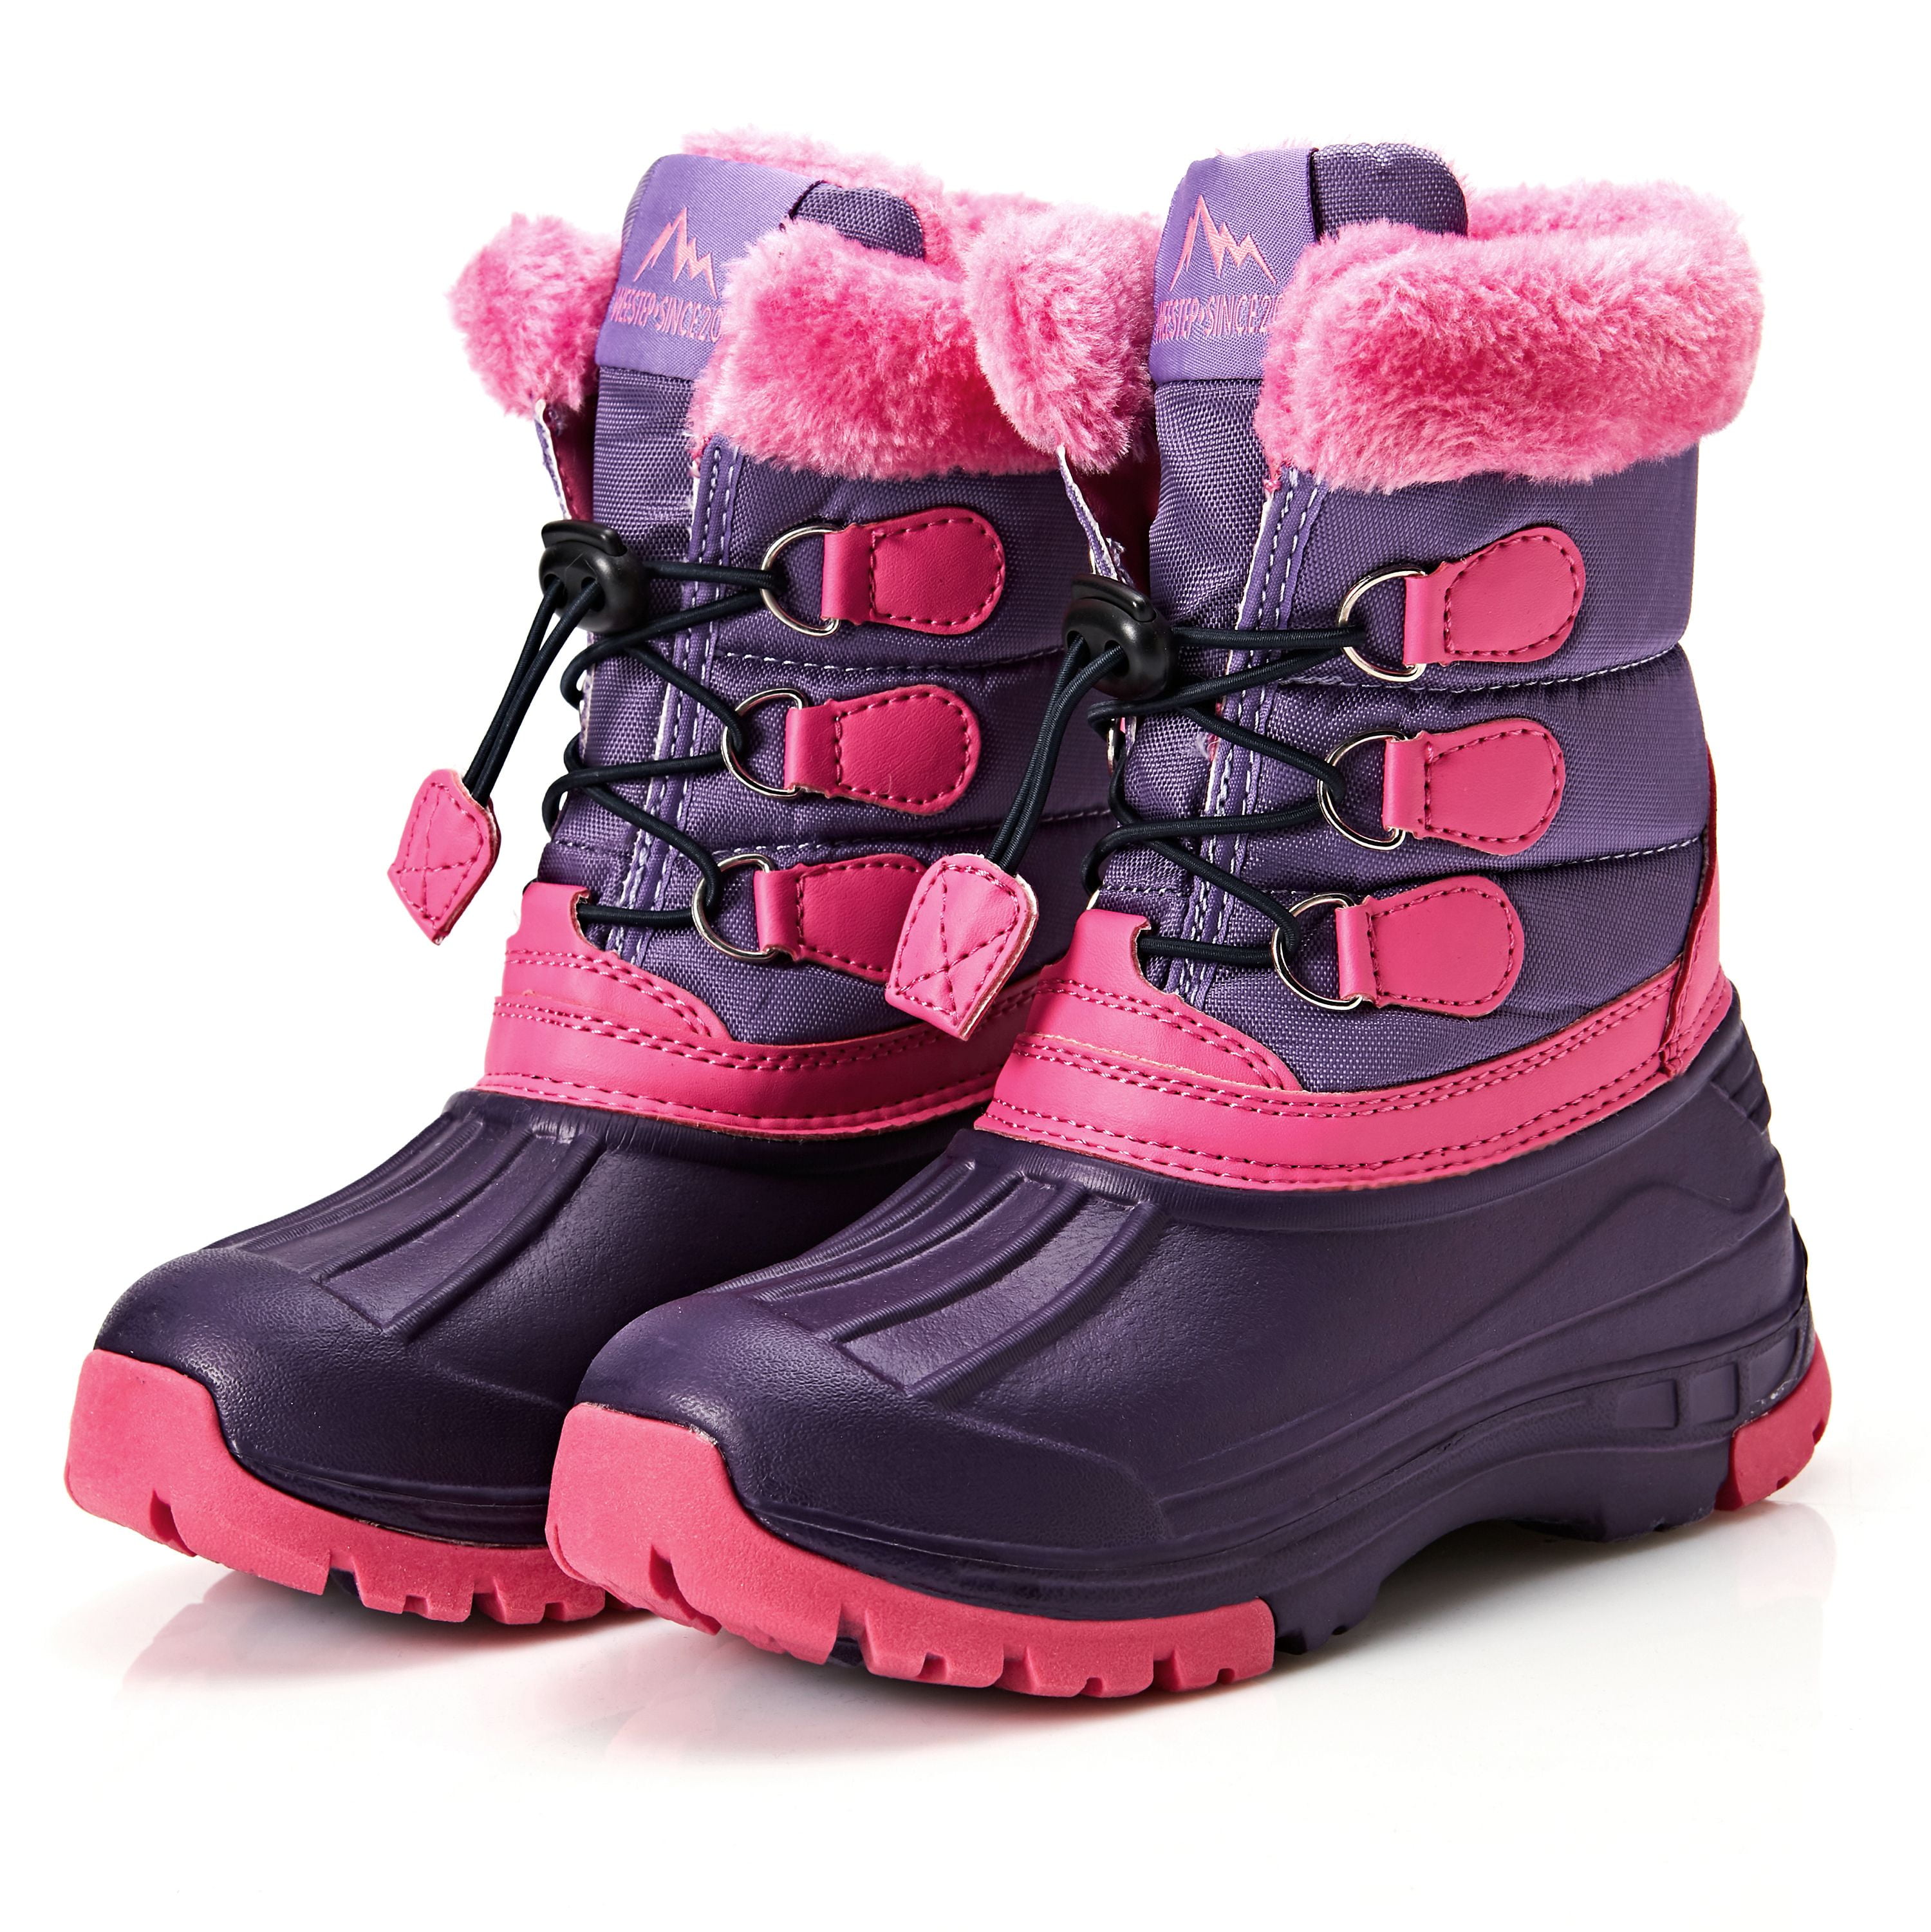 Kids Hiking Boots Boys Waterproof Snow Boots Winter Boots for Girl Sneaker